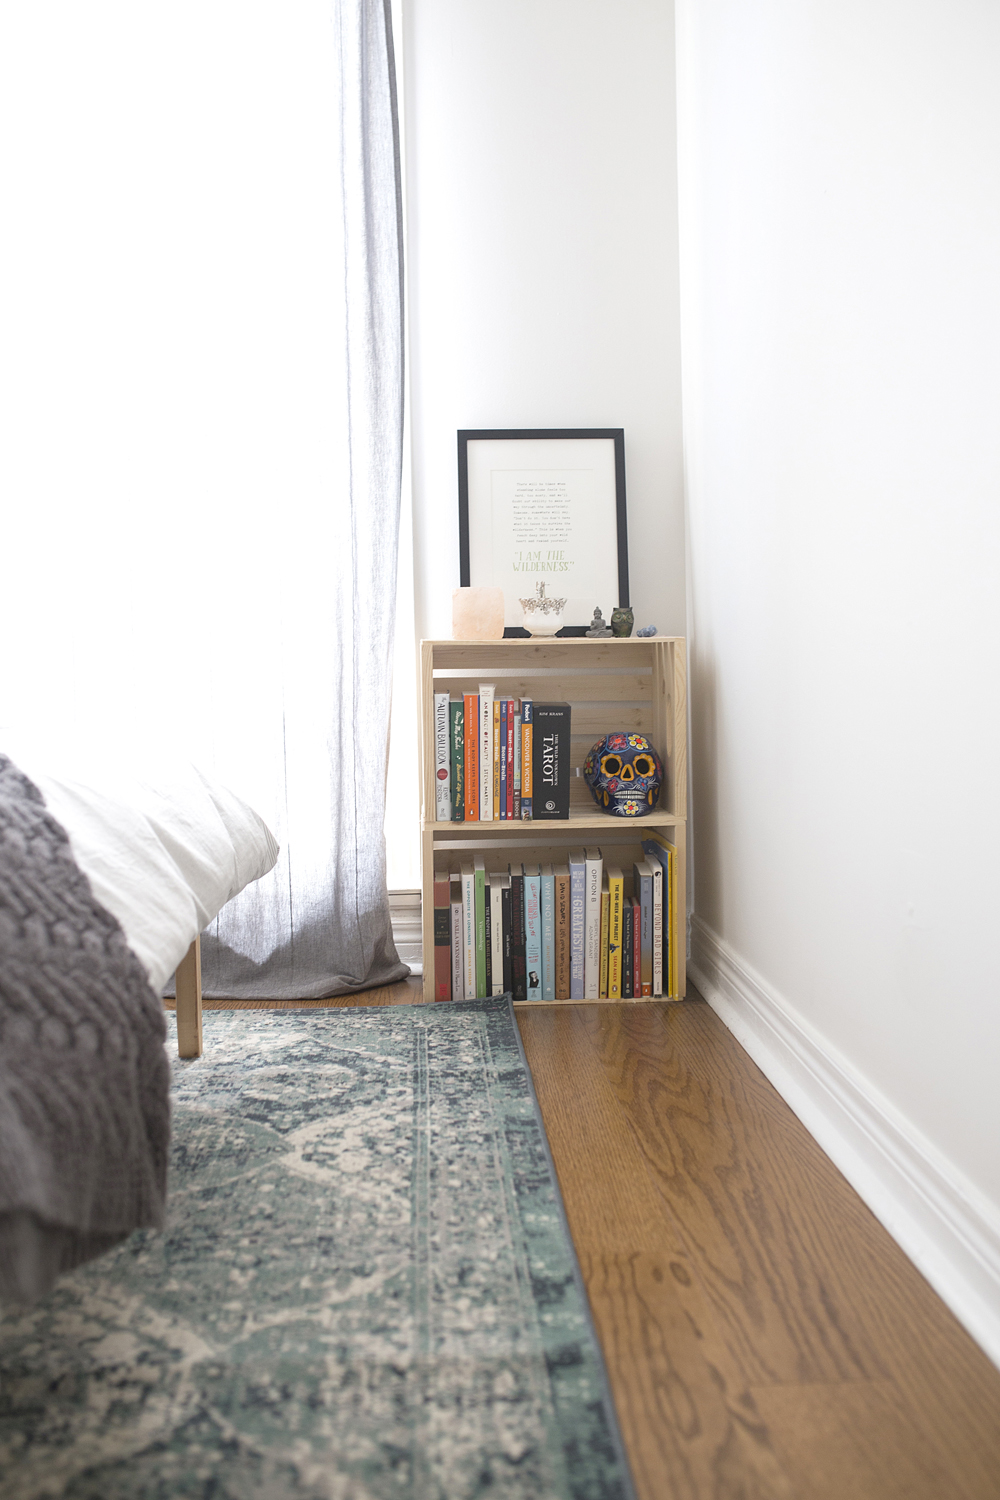 A sunny bedroom with a small crate bookshelf on the floor and filled with books and knick-knacks